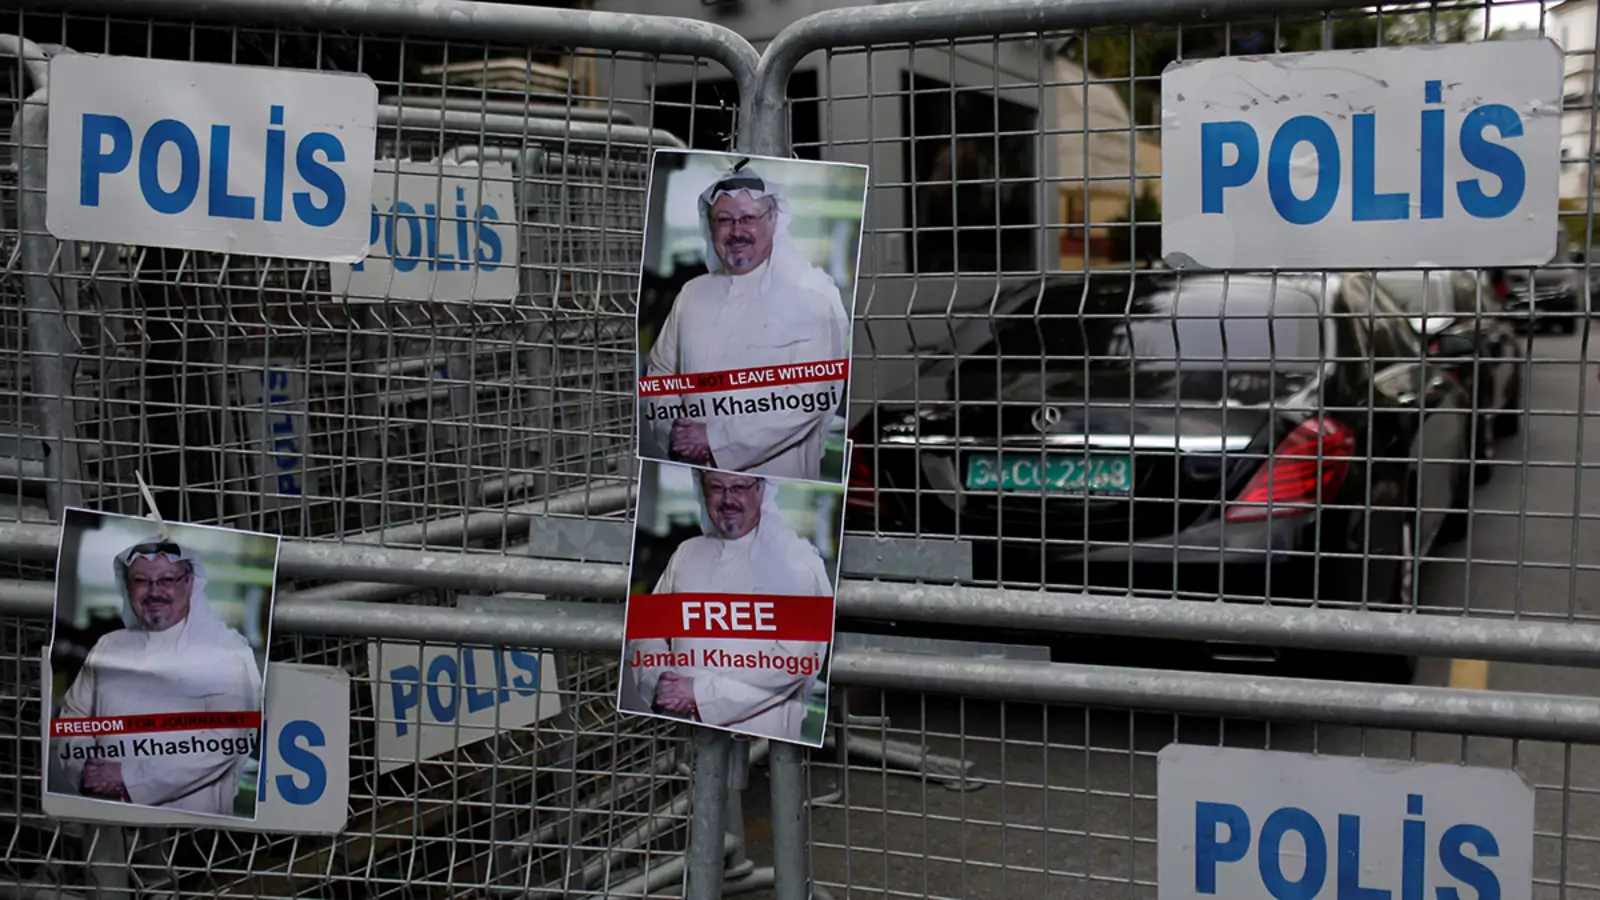 Pictures of Saudi journalist Khashoggi are placed on security barriers during a protest outside the Saudi Consulate in Istanbul, Turkey, October 8, 2018.